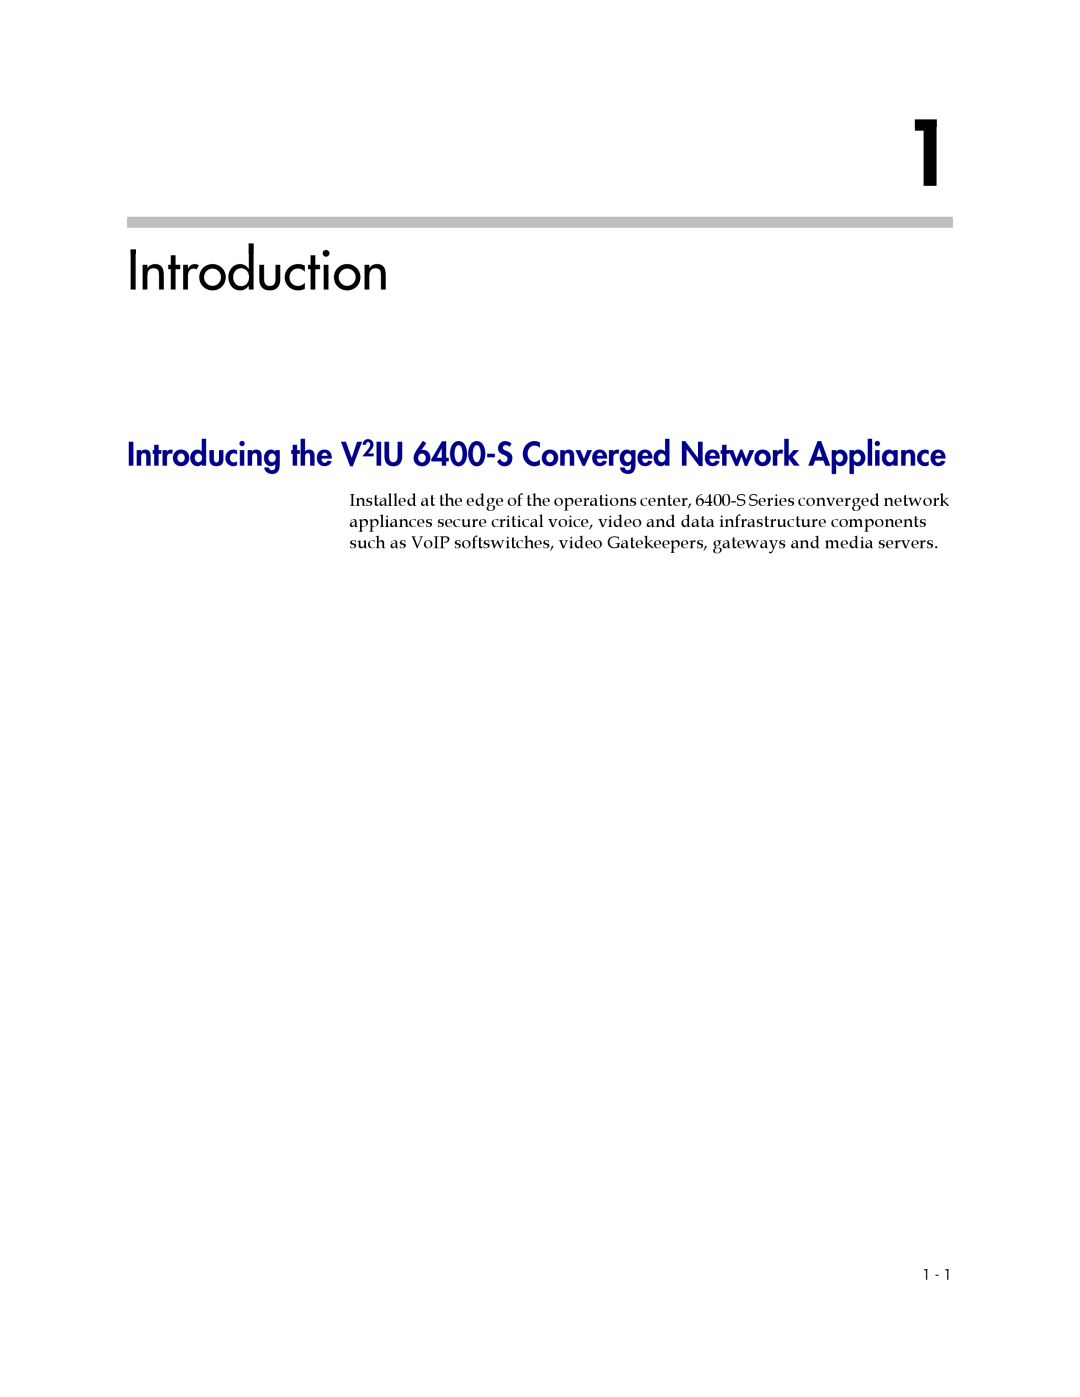 Polycom manual Introduction, Introducing the V2IU 6400-S Converged Network Appliance 